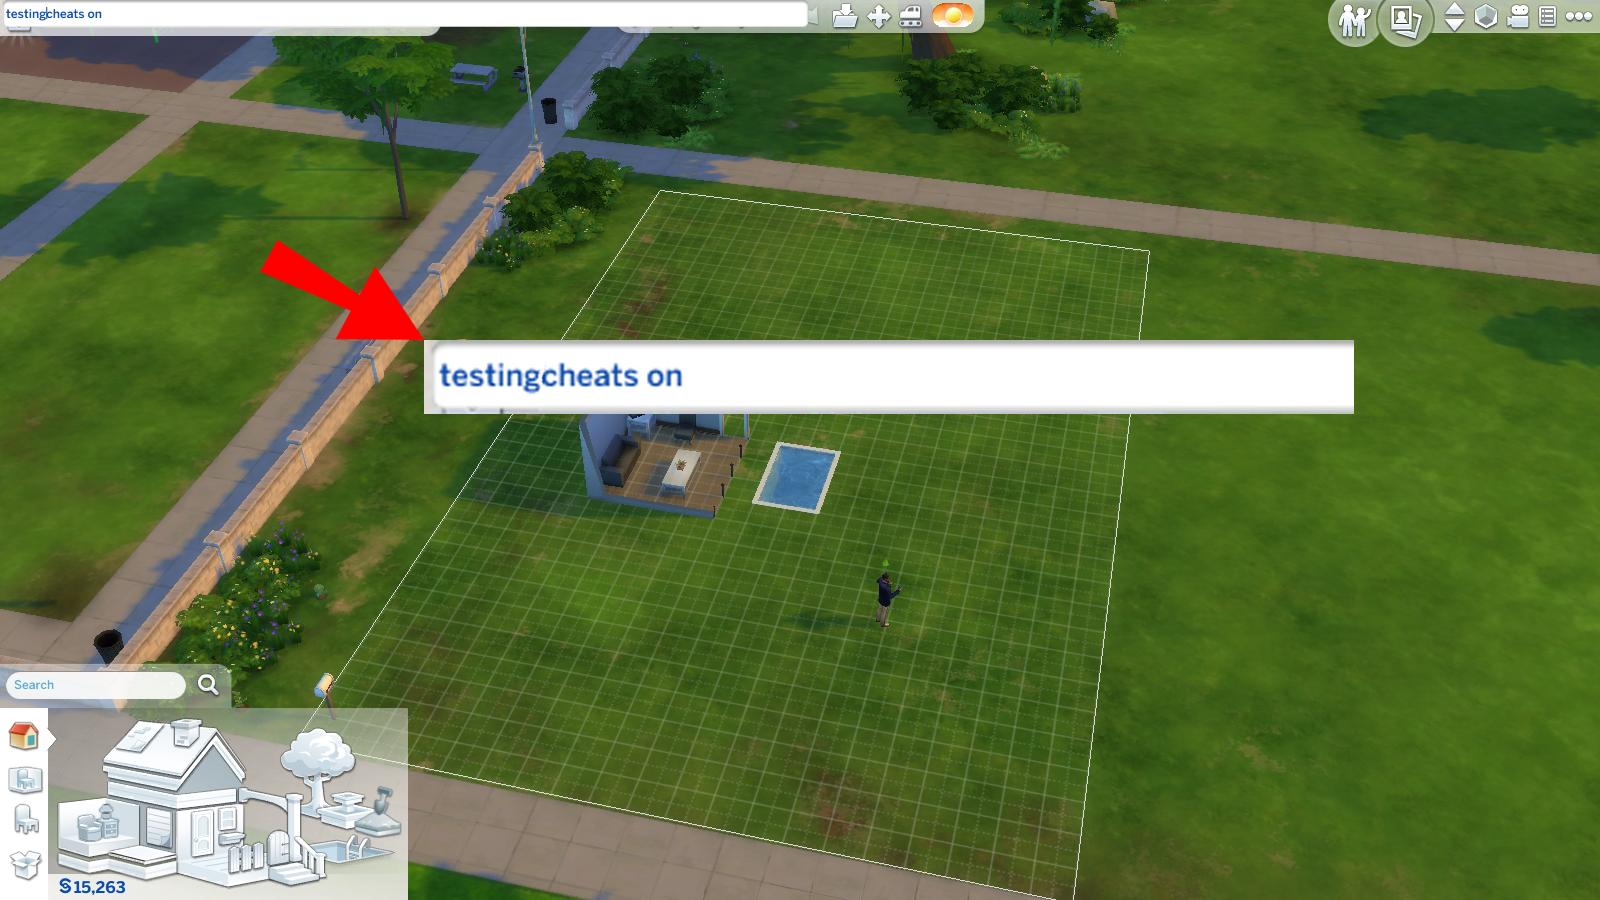 kleurstof Enzovoorts Vijfde How to Enable Cheats in Sims 4